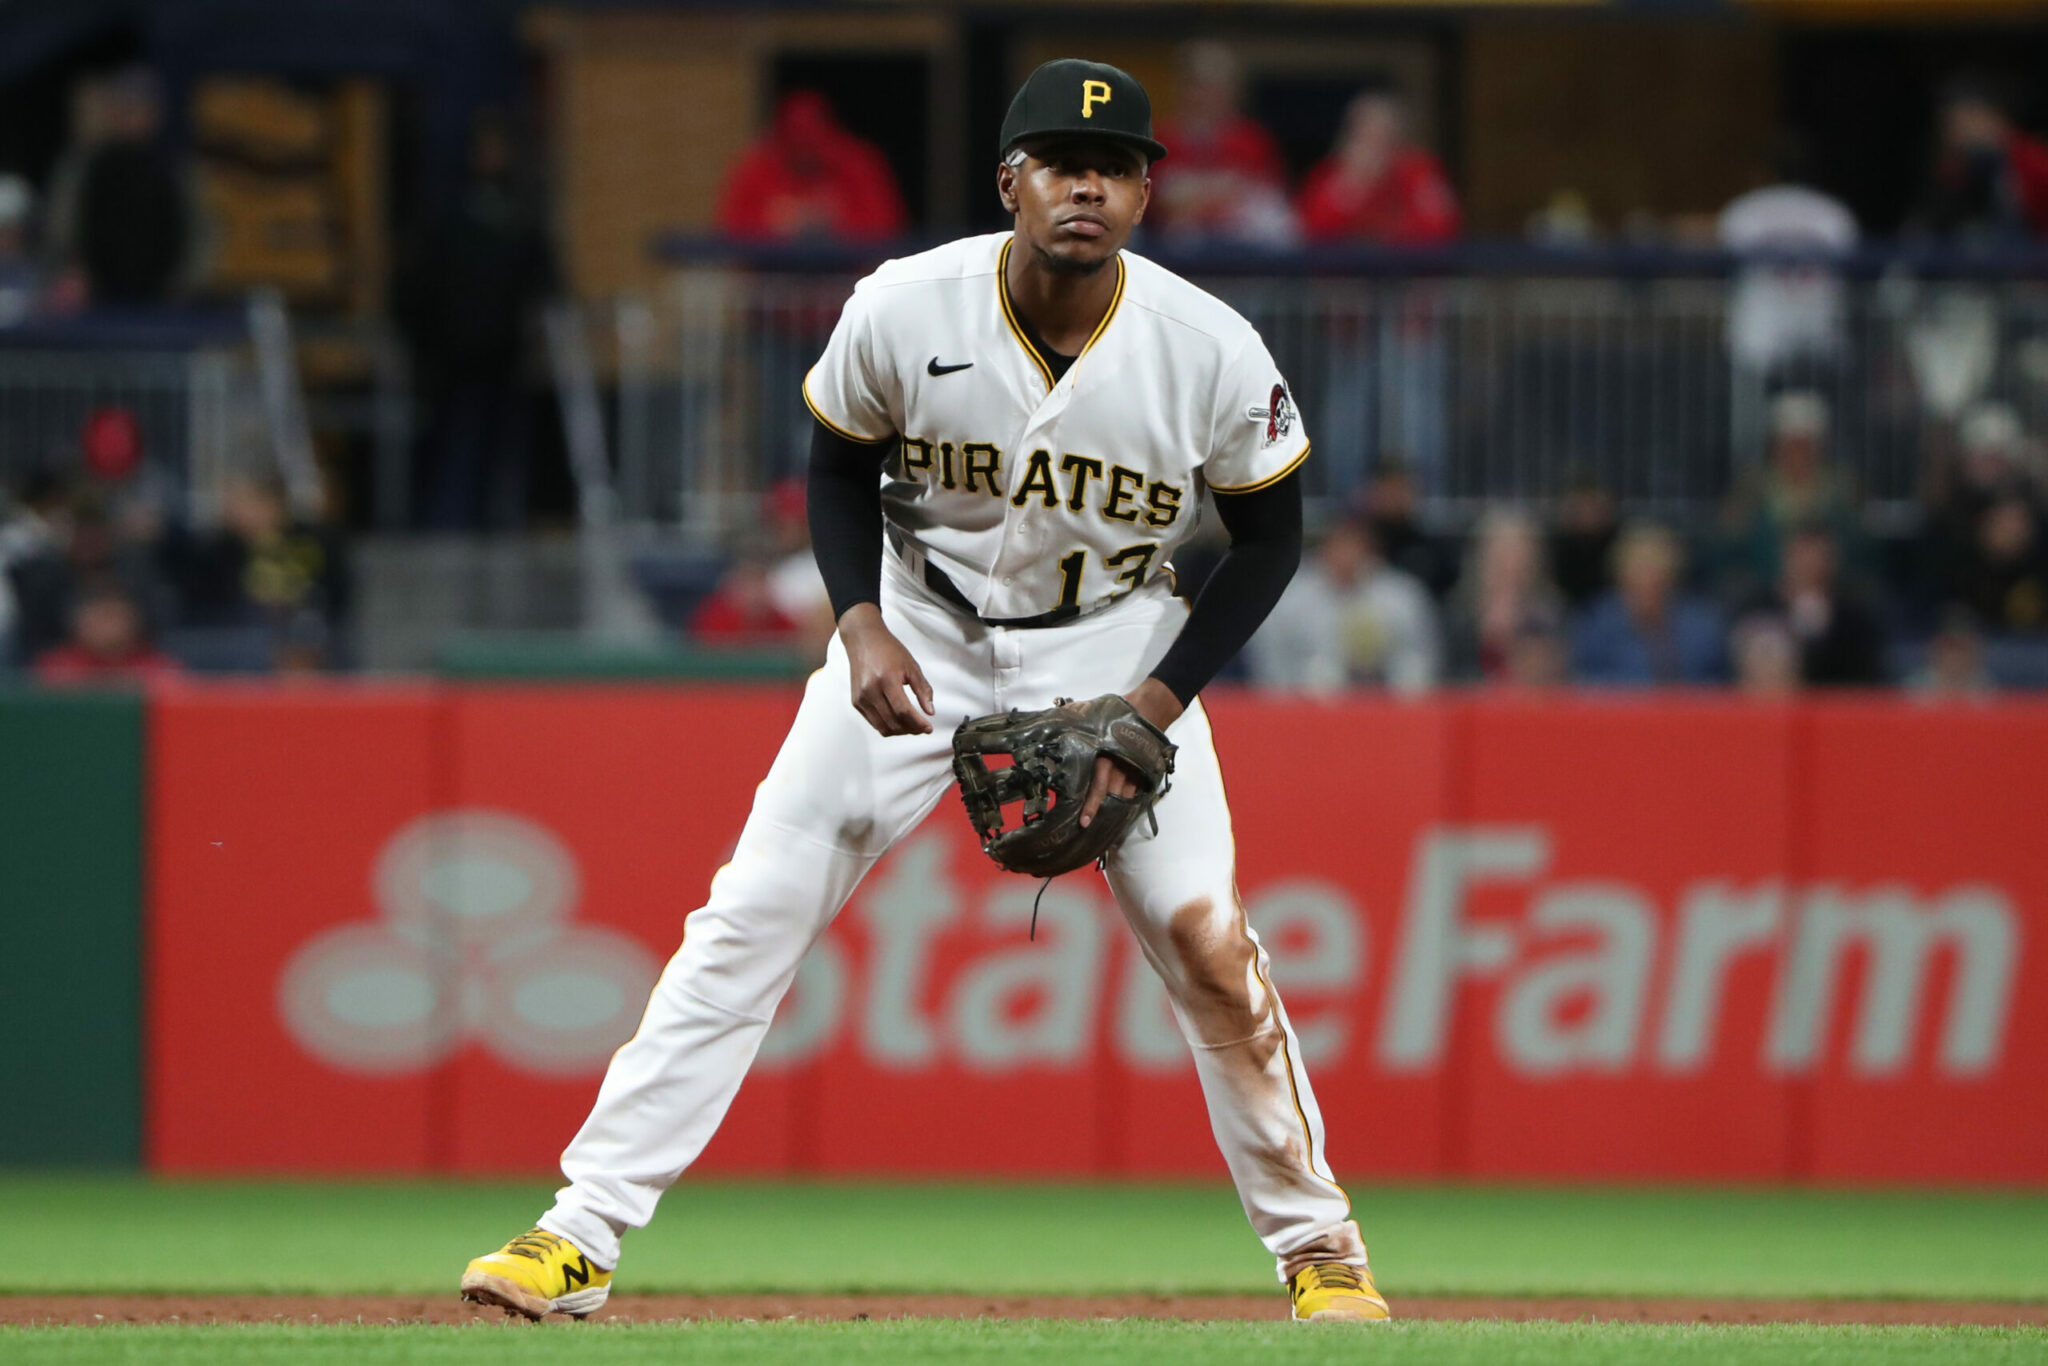 The Pirates’ Infield Defense Just Got an Important, Yet Subtle, Upgrade